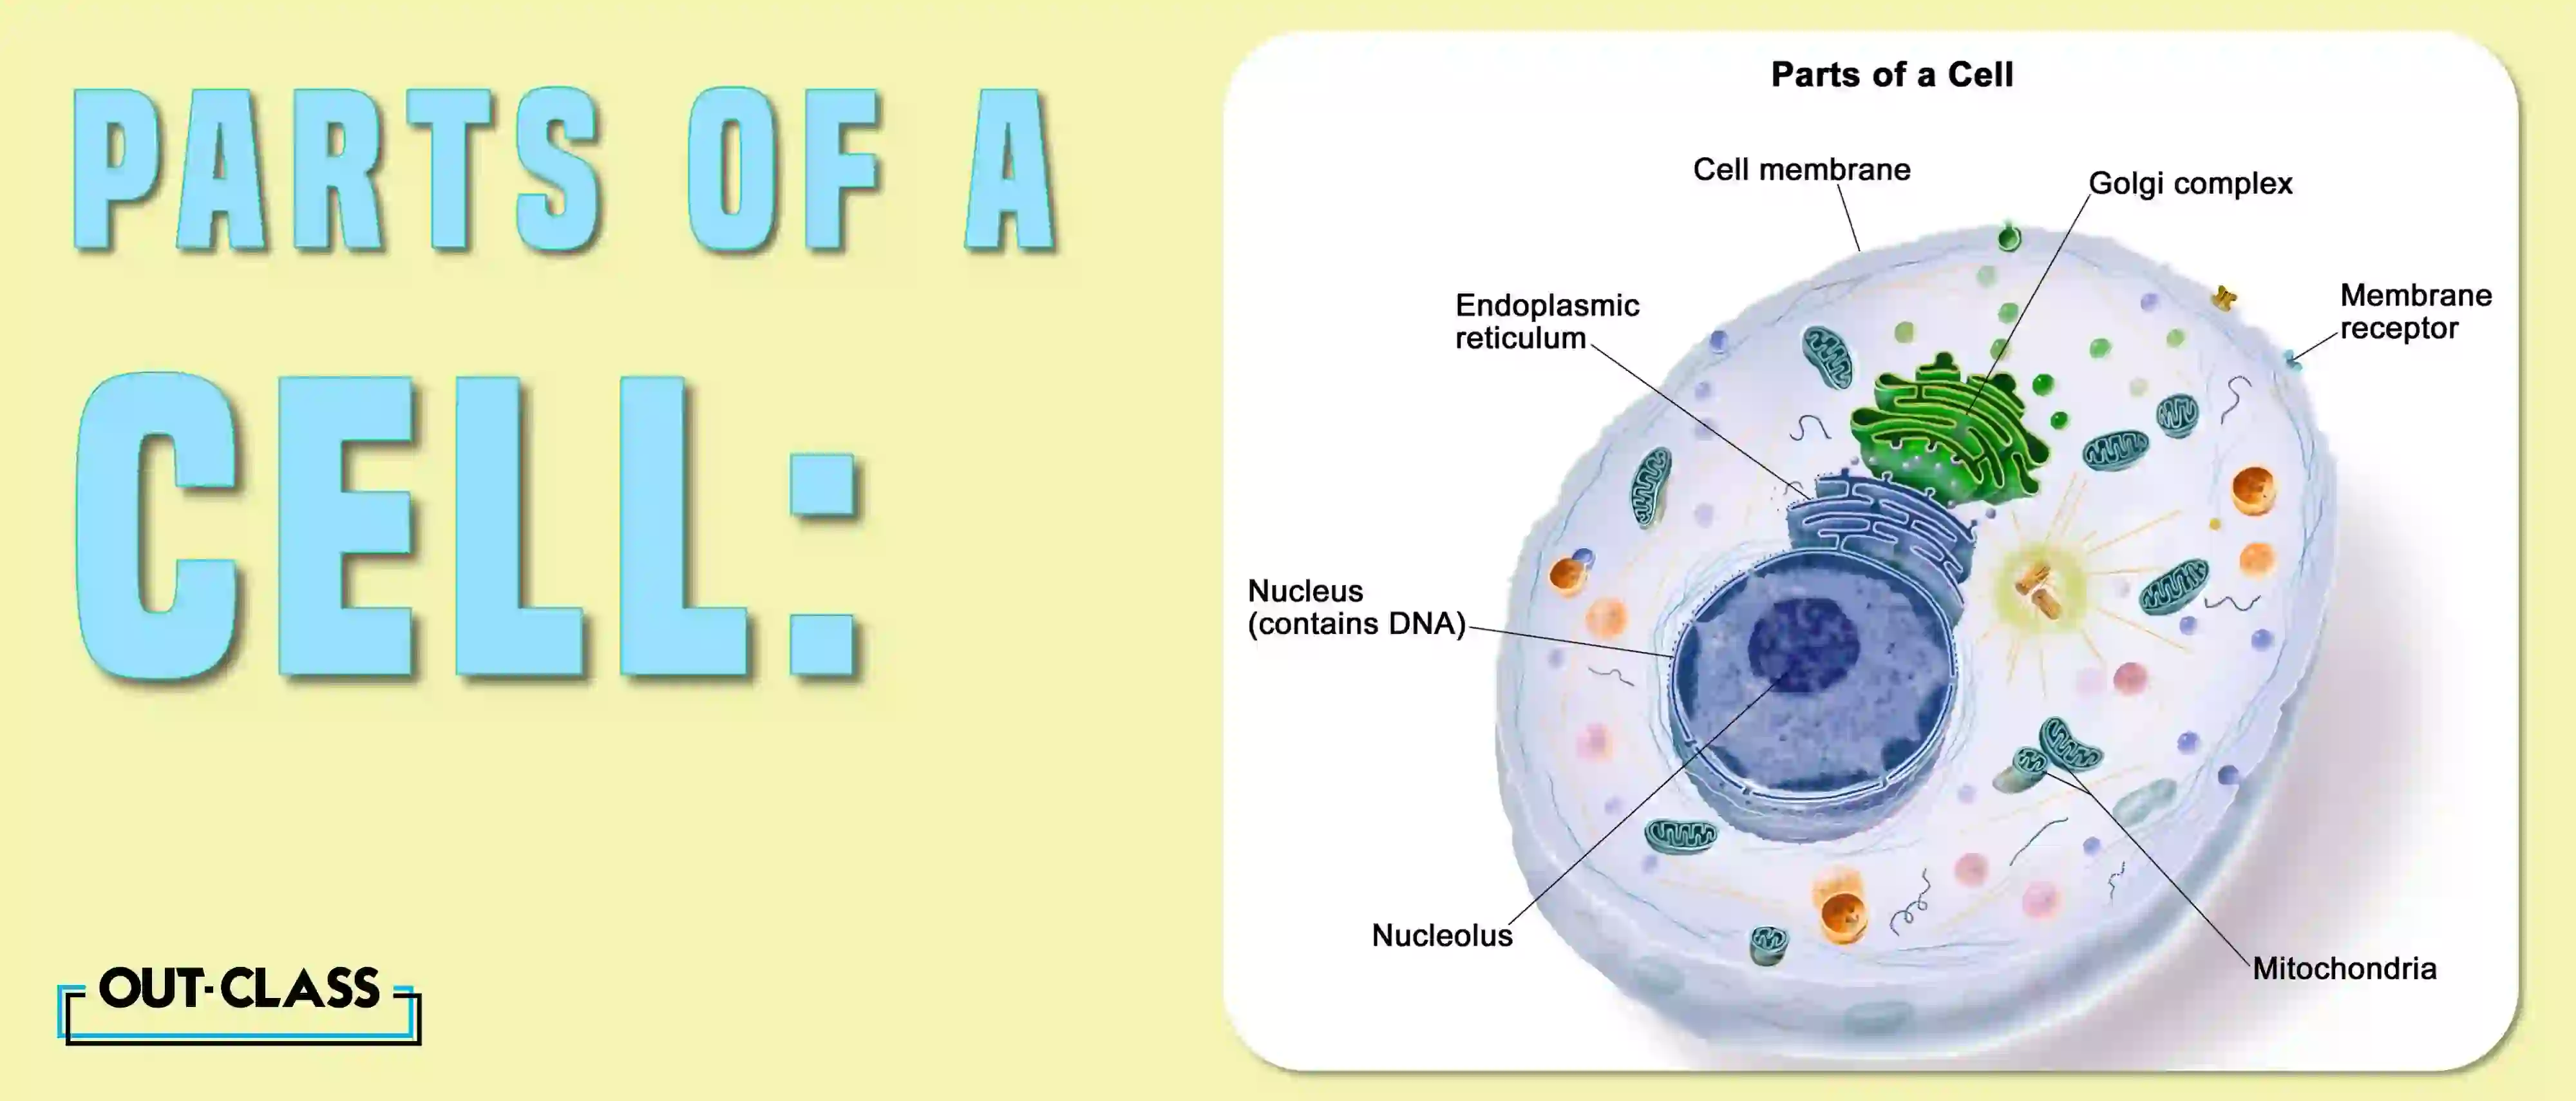 Golgi Apparatus, also known as golgi complex or golgi body, in animal and plant cells. What is the golgi apparatus responsible for is also covered.